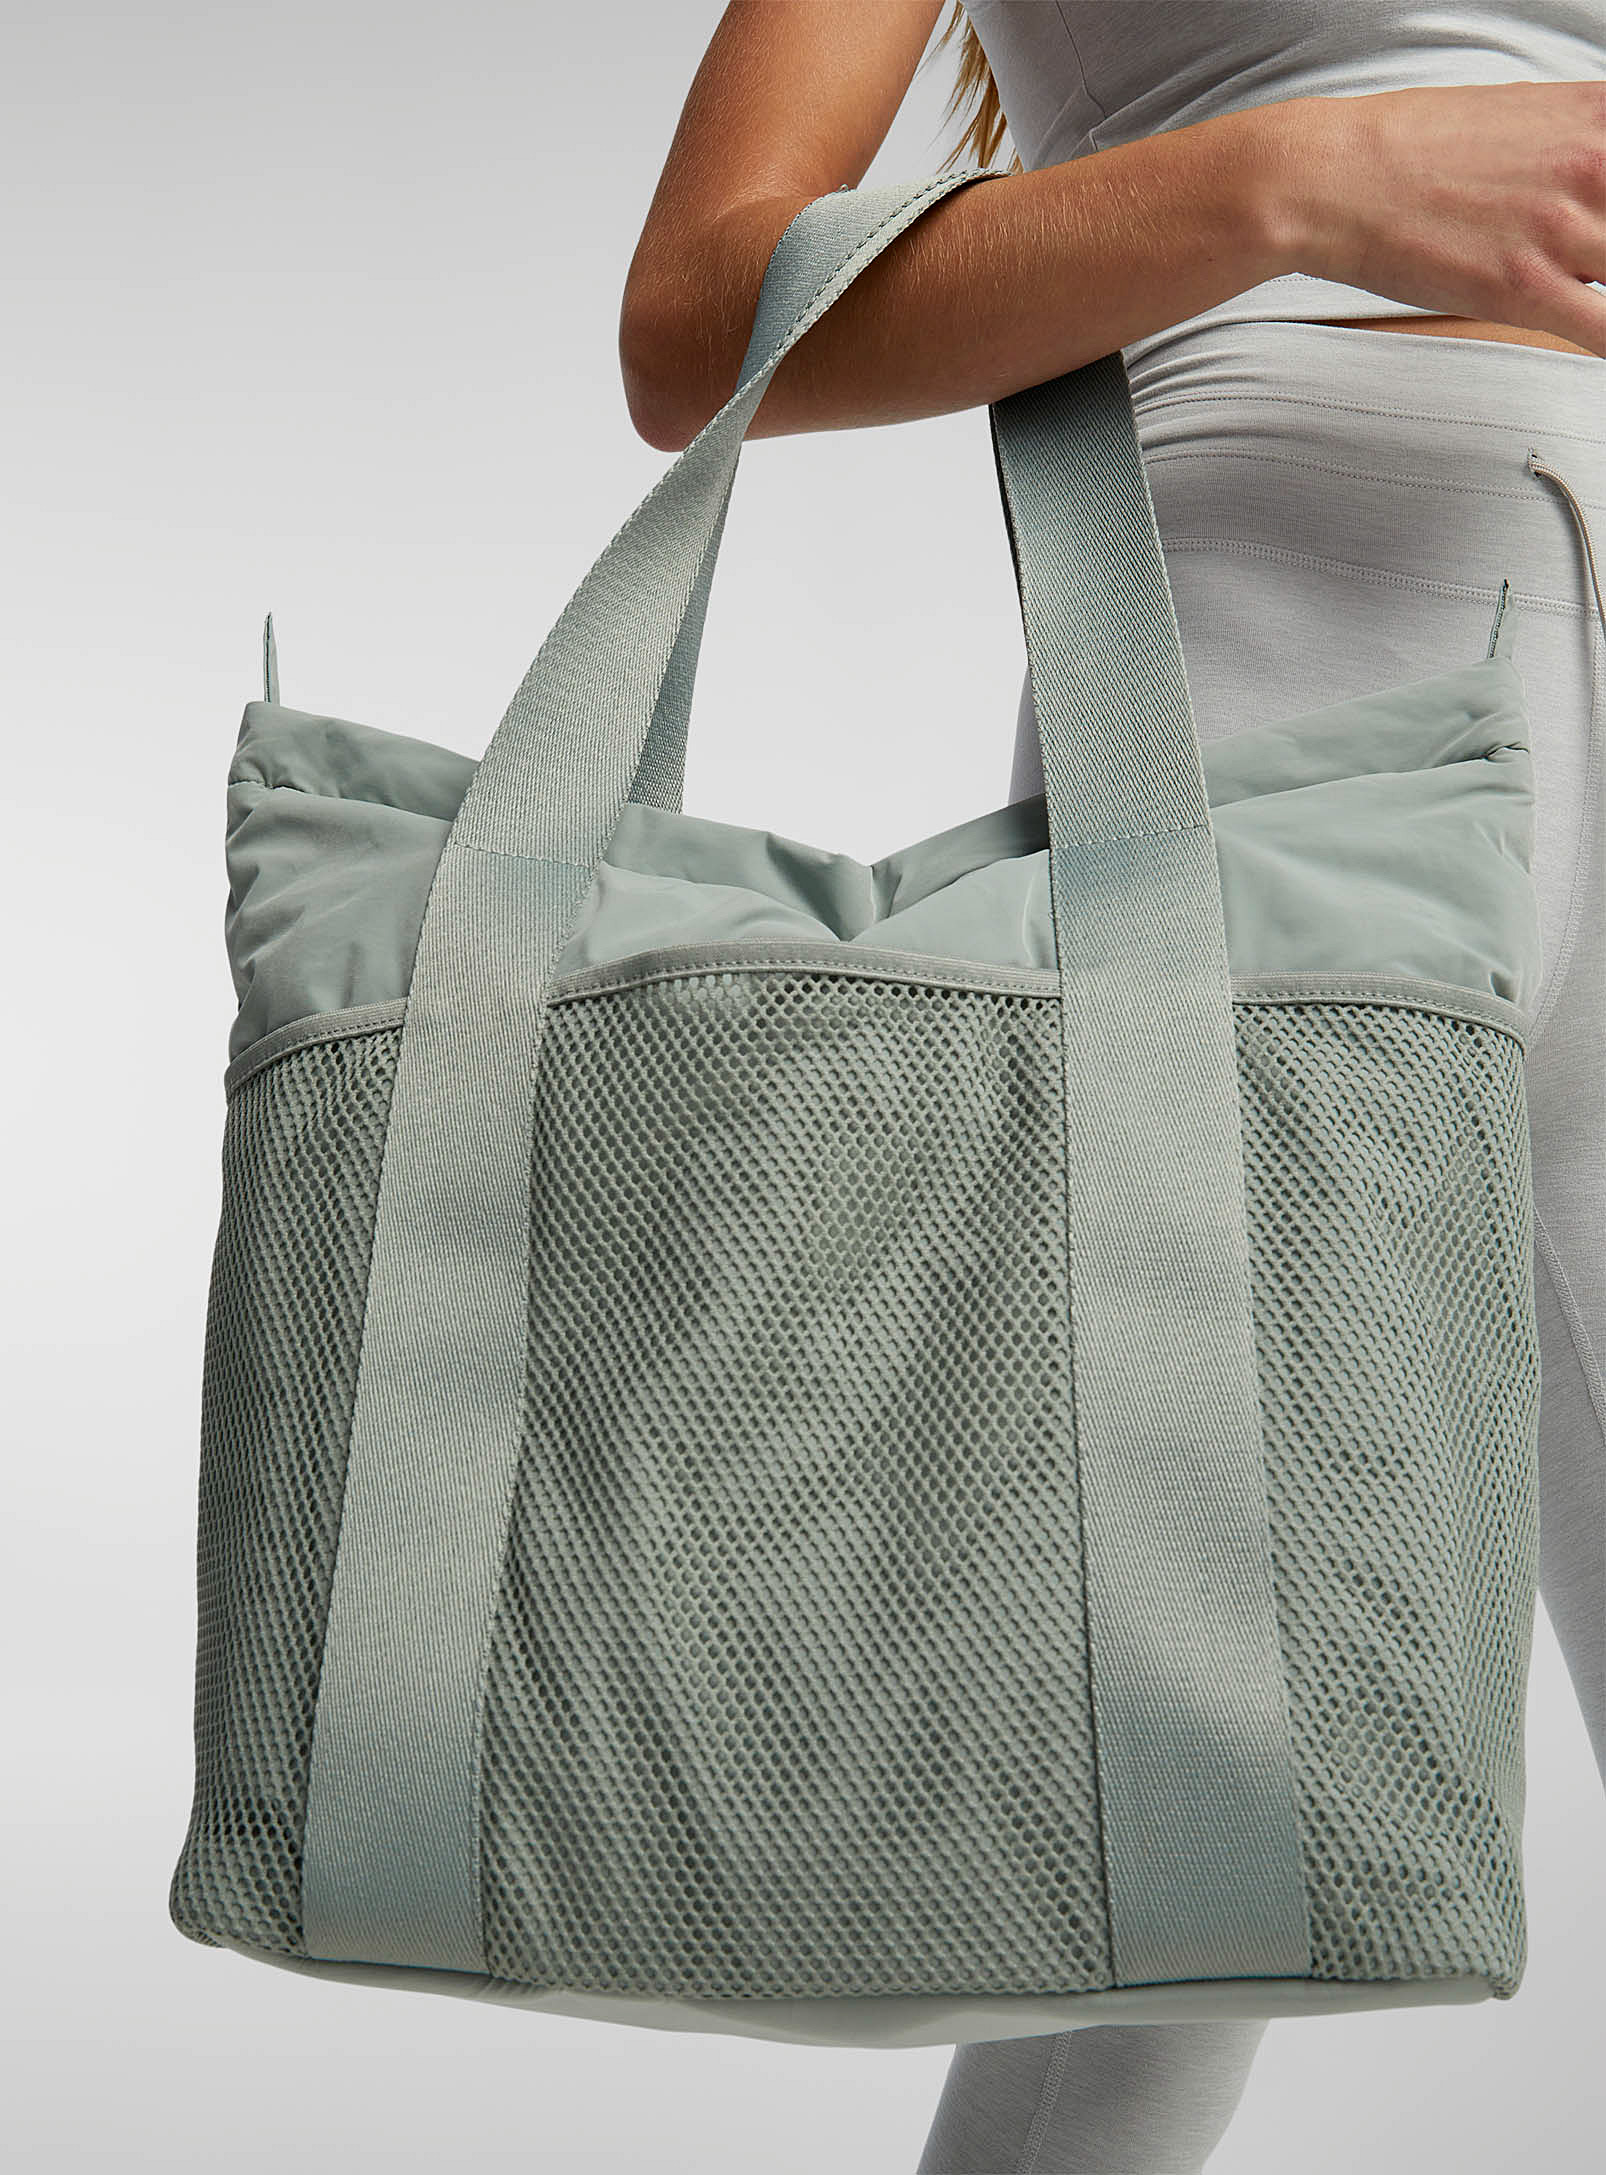 I.fiv5 Large Puffy Mesh-pocket Tote In Kelly Green